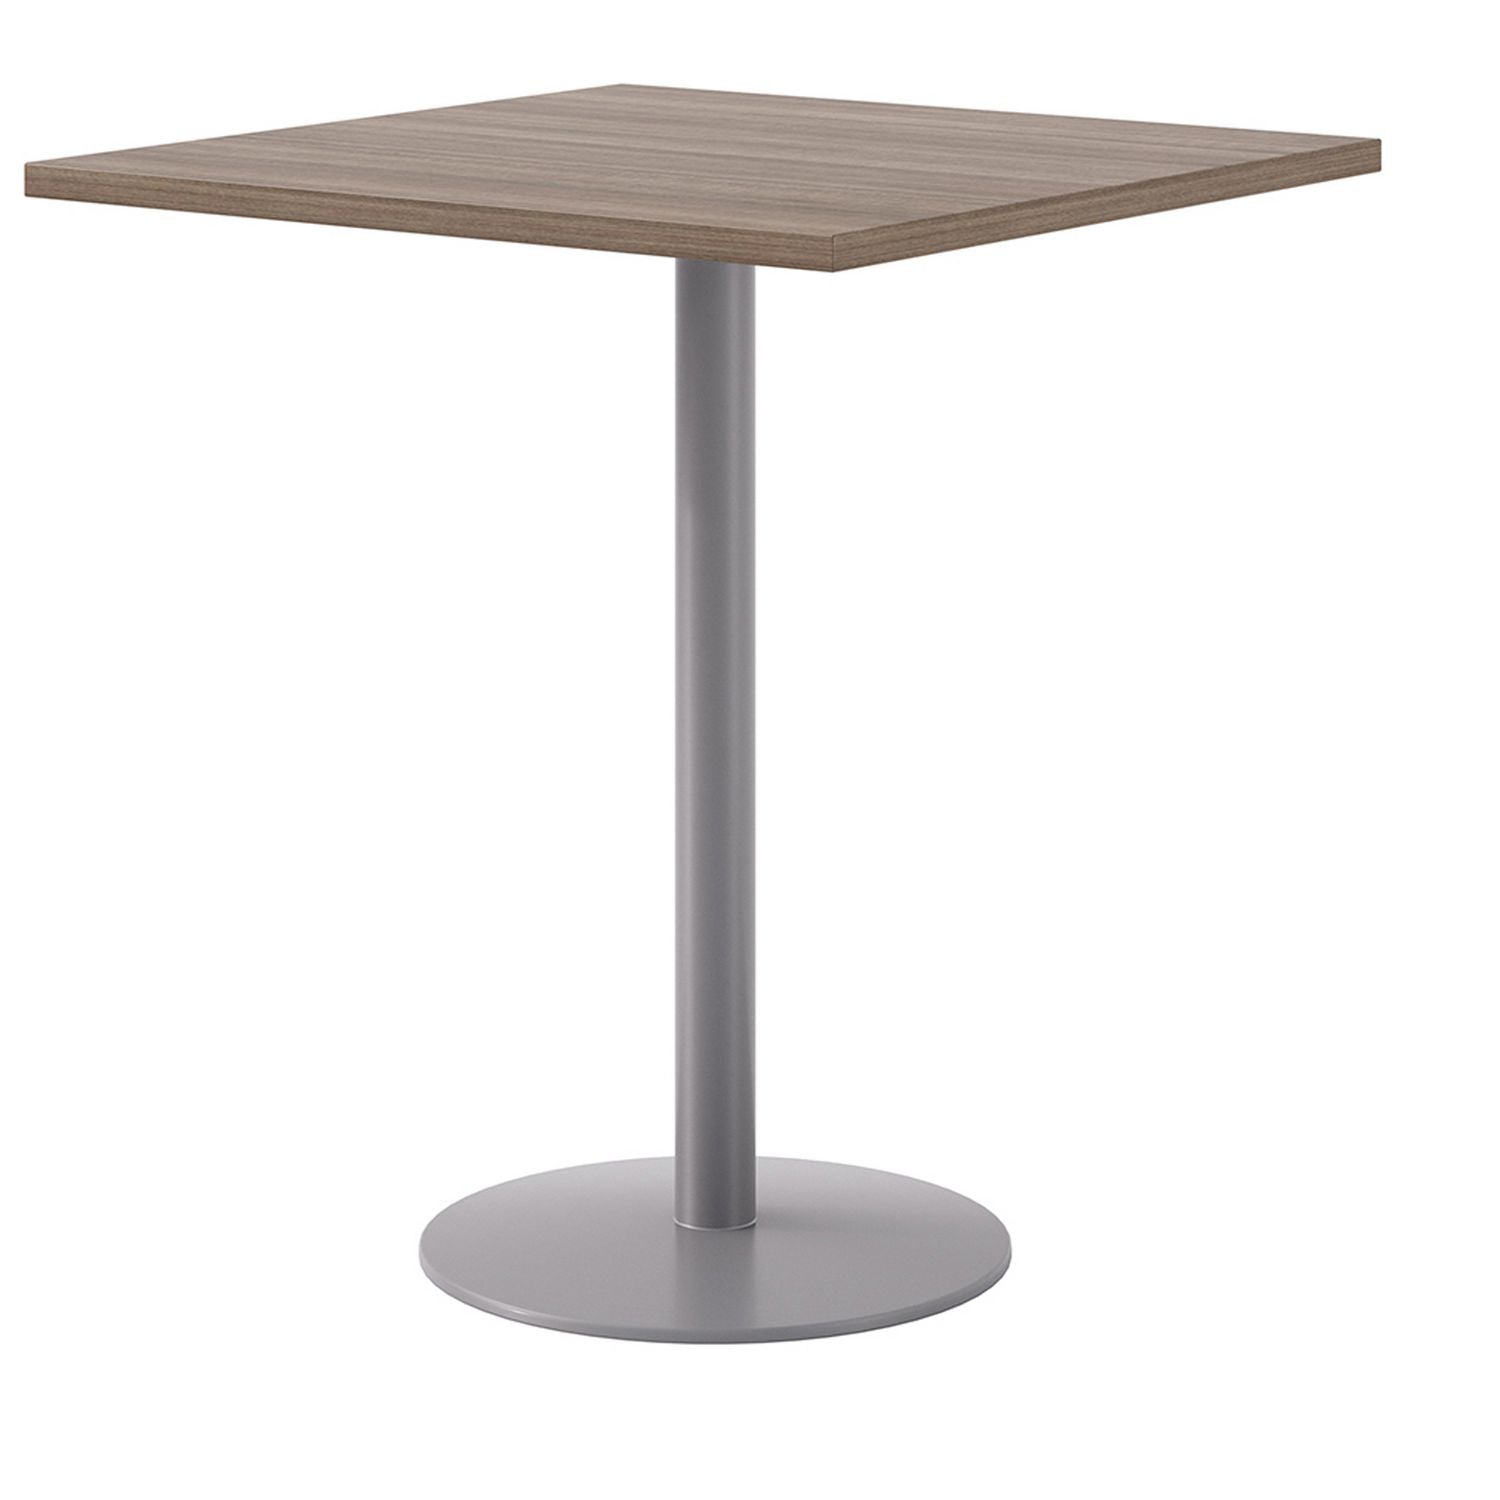 pedestal-bistro-table-with-four-white-jive-series-barstools-square-36-x-36-x-41-studio-teak-ships-in-4-6-business-days_kfi811774039932 - 2